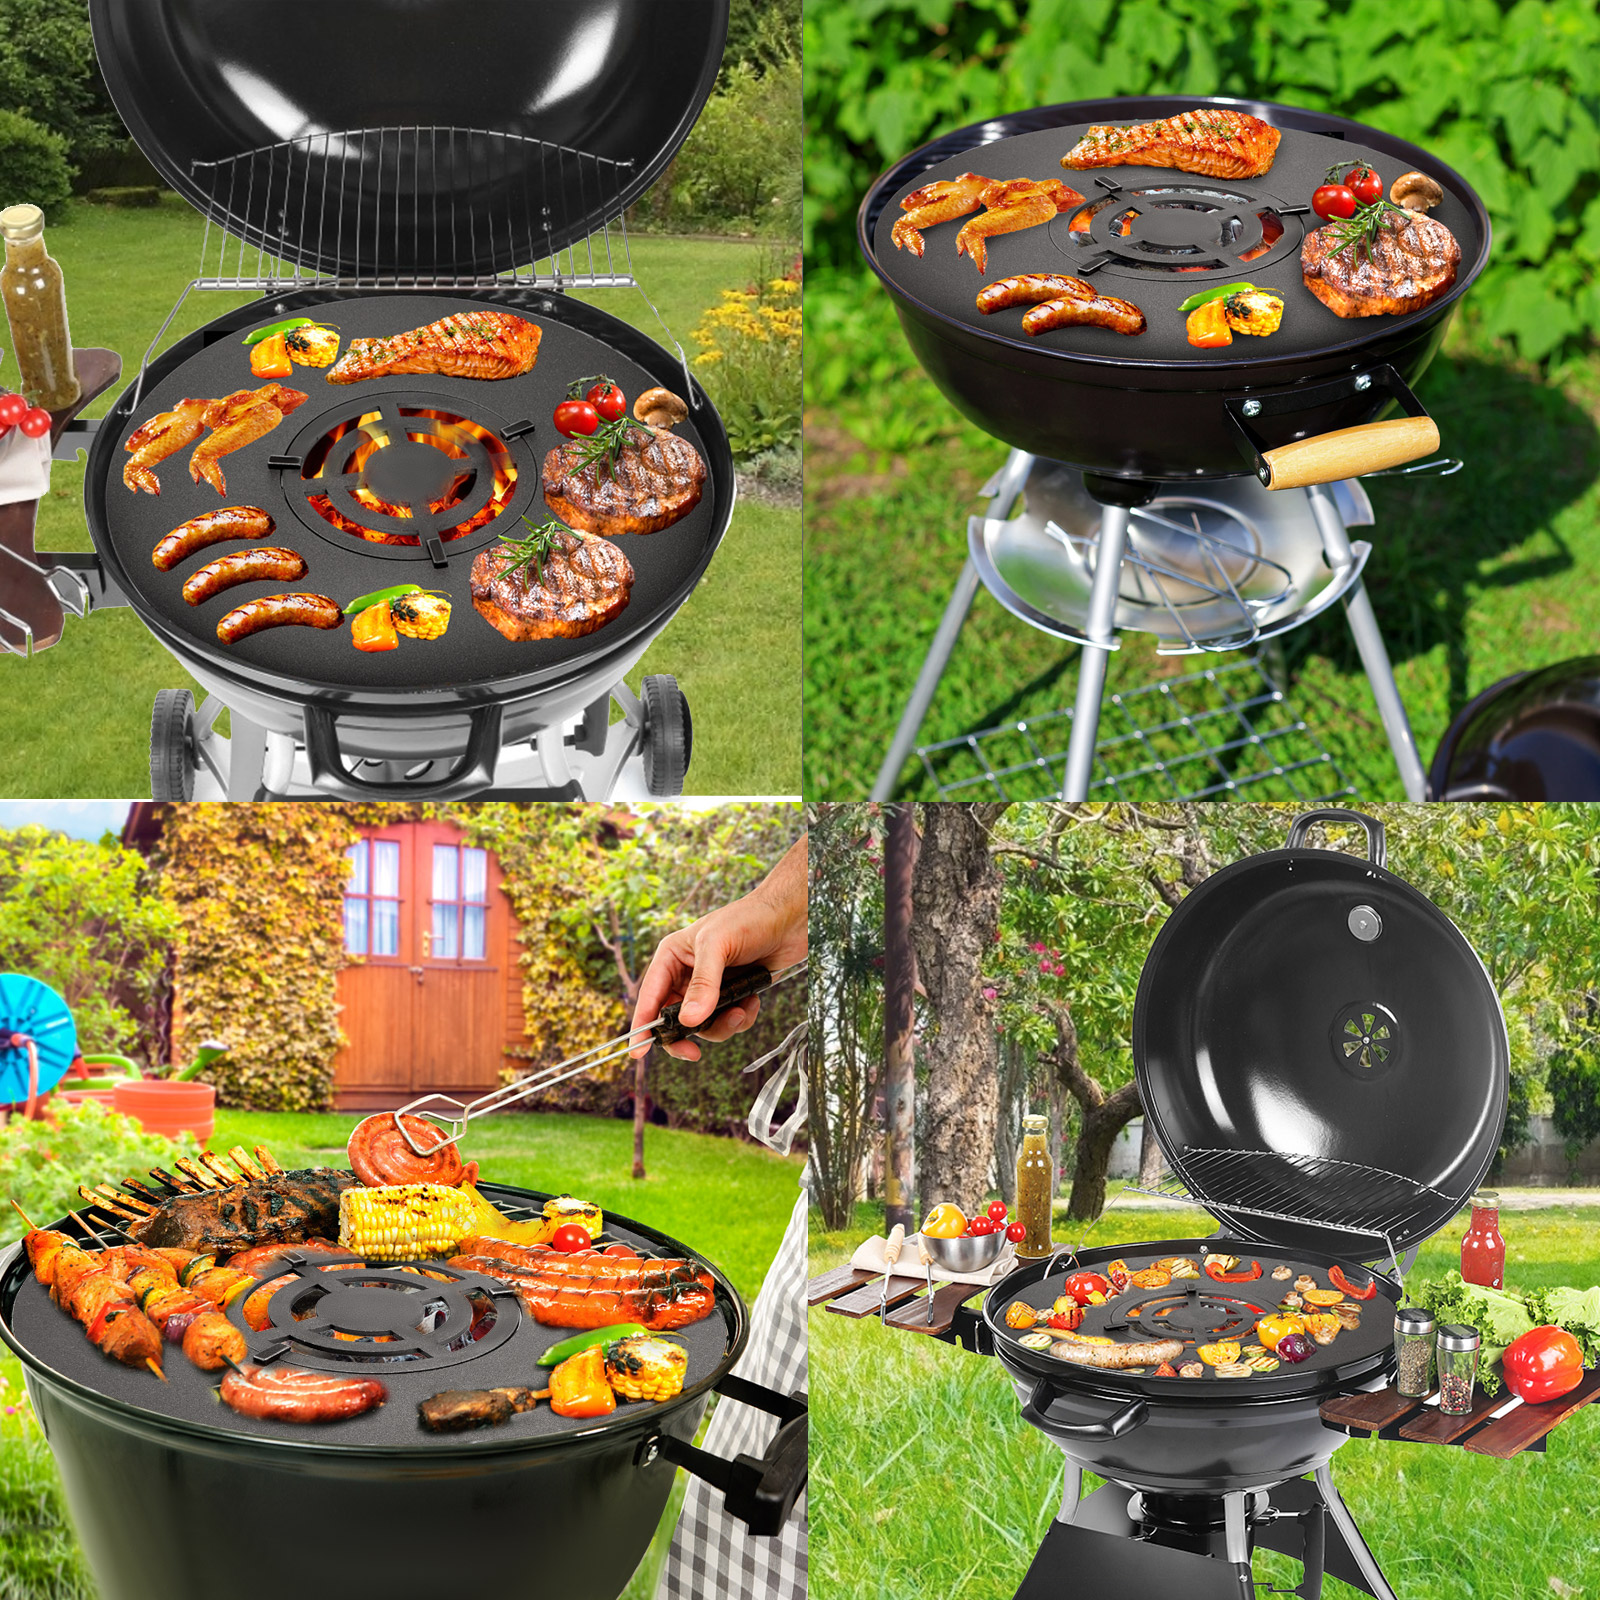 https://d2qc09rl1gfuof.cloudfront.net/product/SKJZJ18YC00000001/Grill-Griddle-Grate-m100-7.jpg